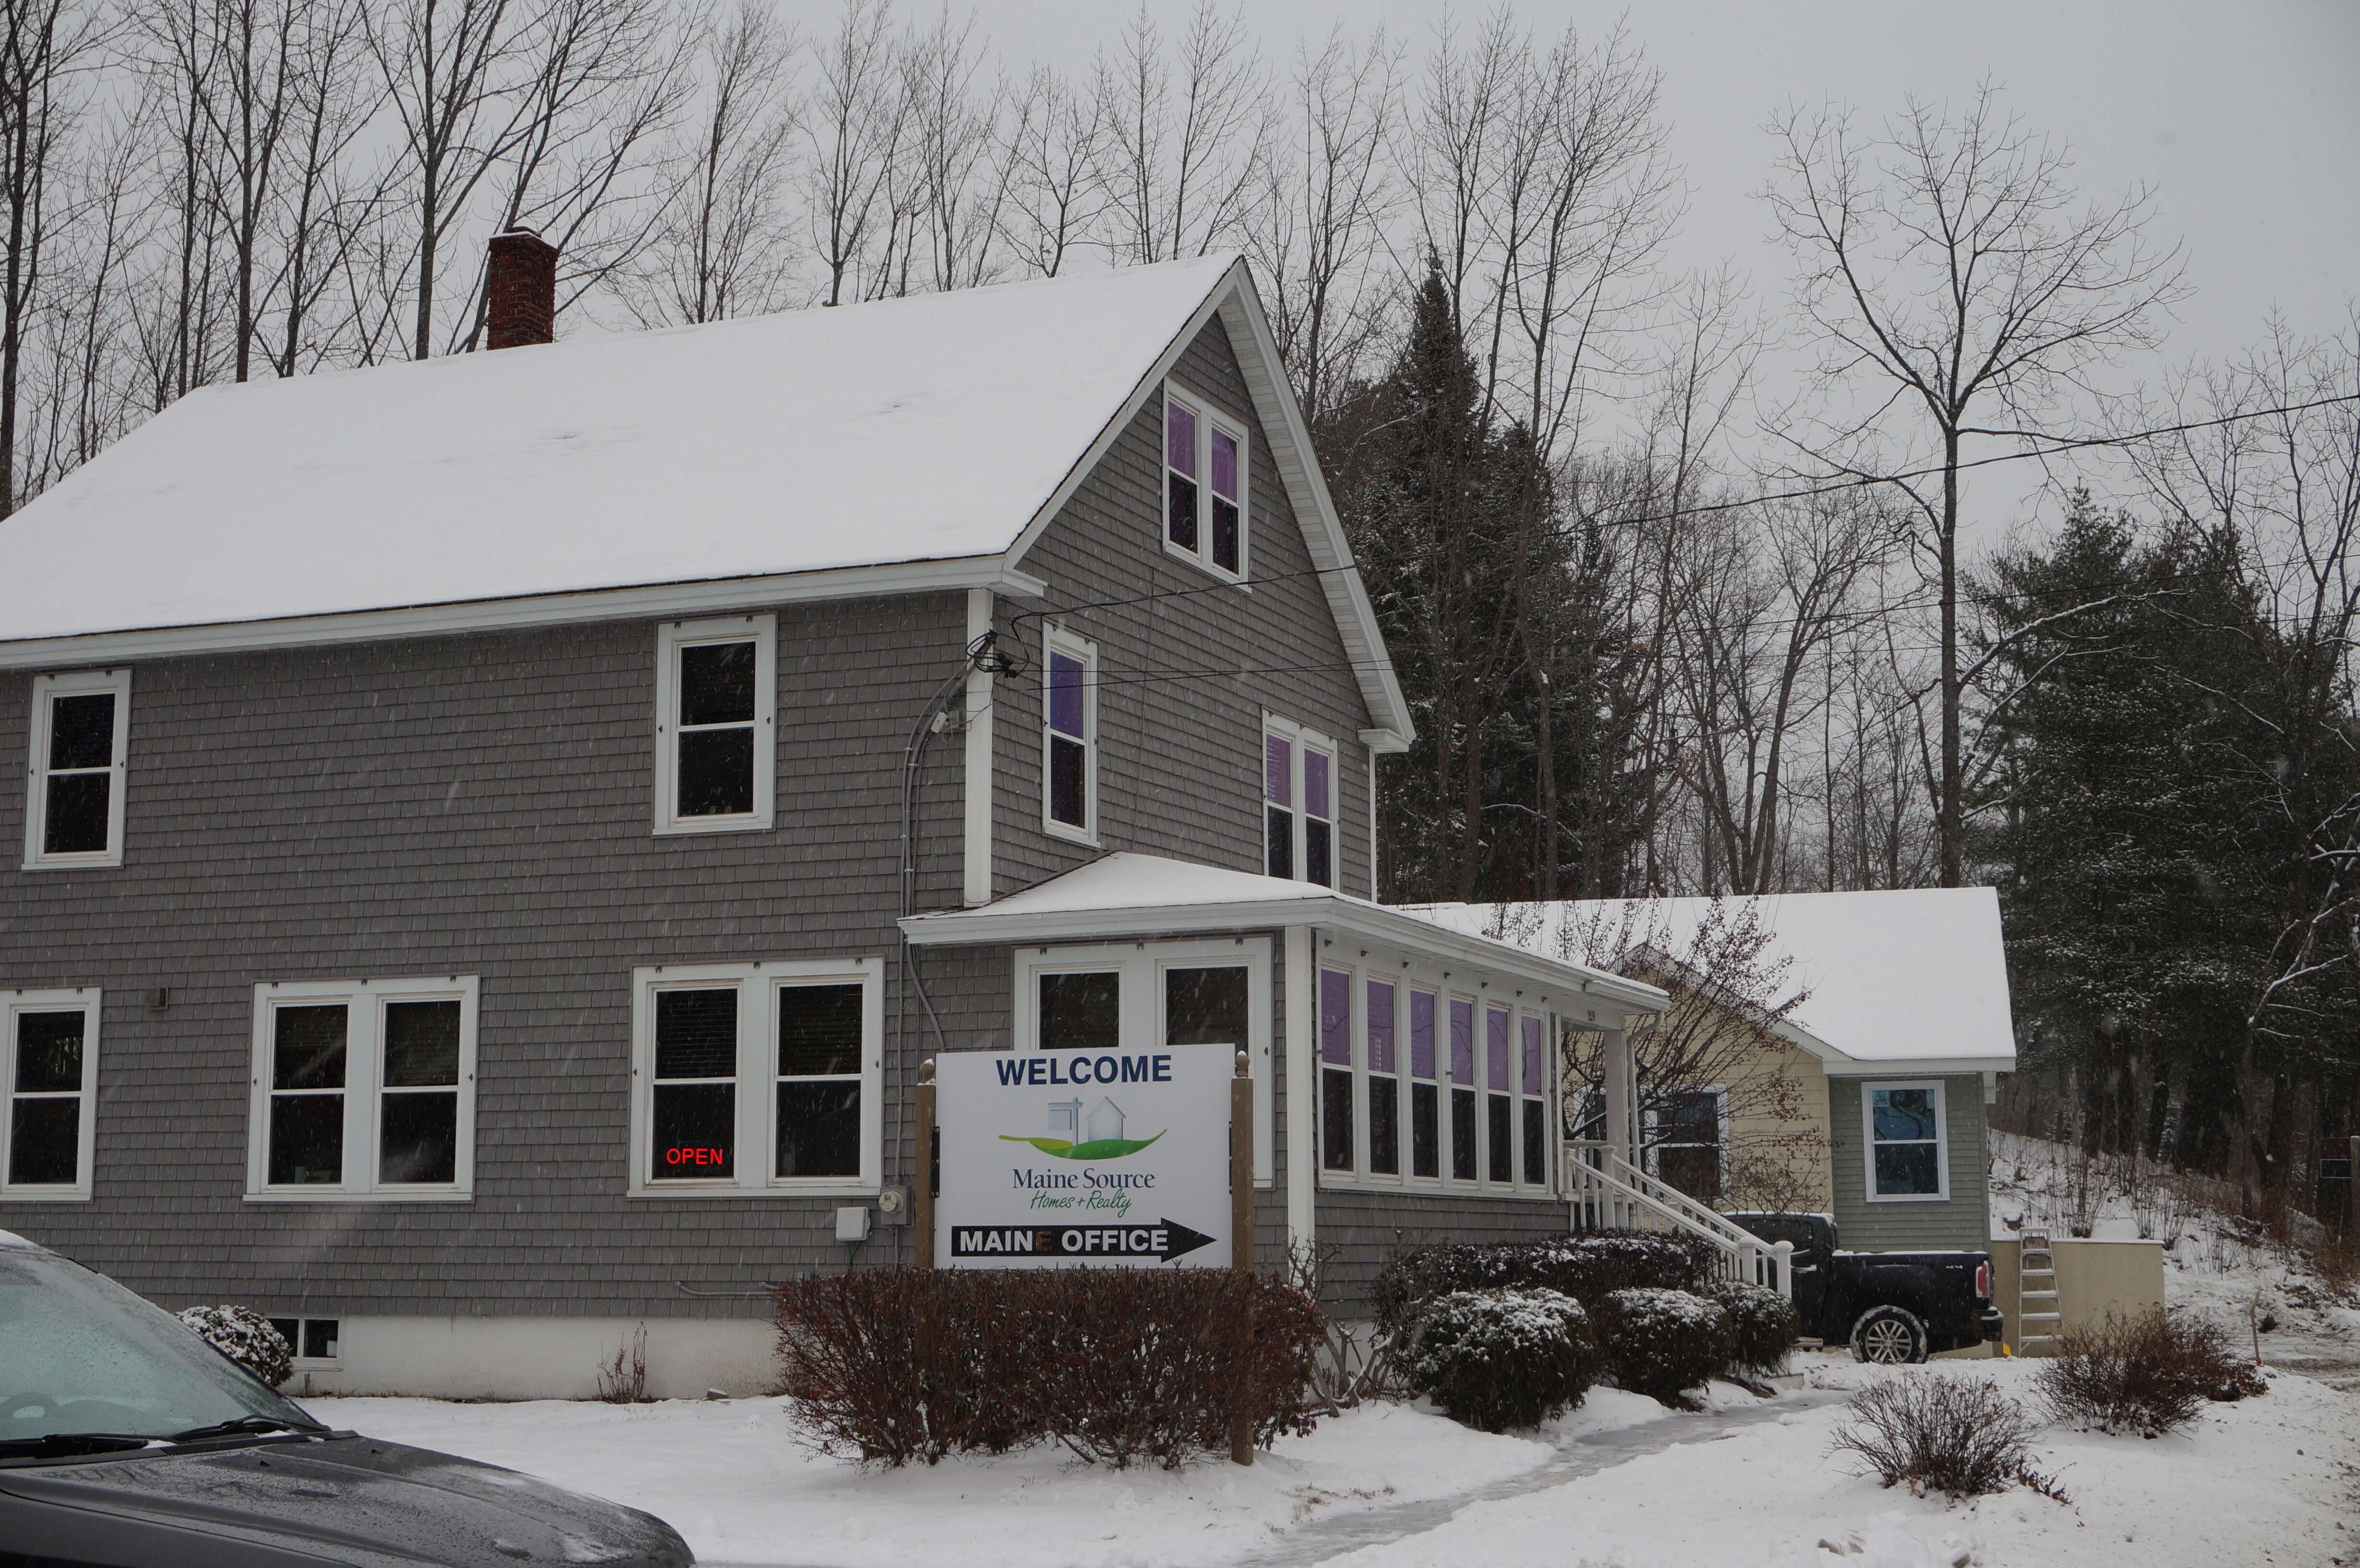 A two-story house with a sign that says Maine Source, and a neon "open" sign in the window on a snowy street